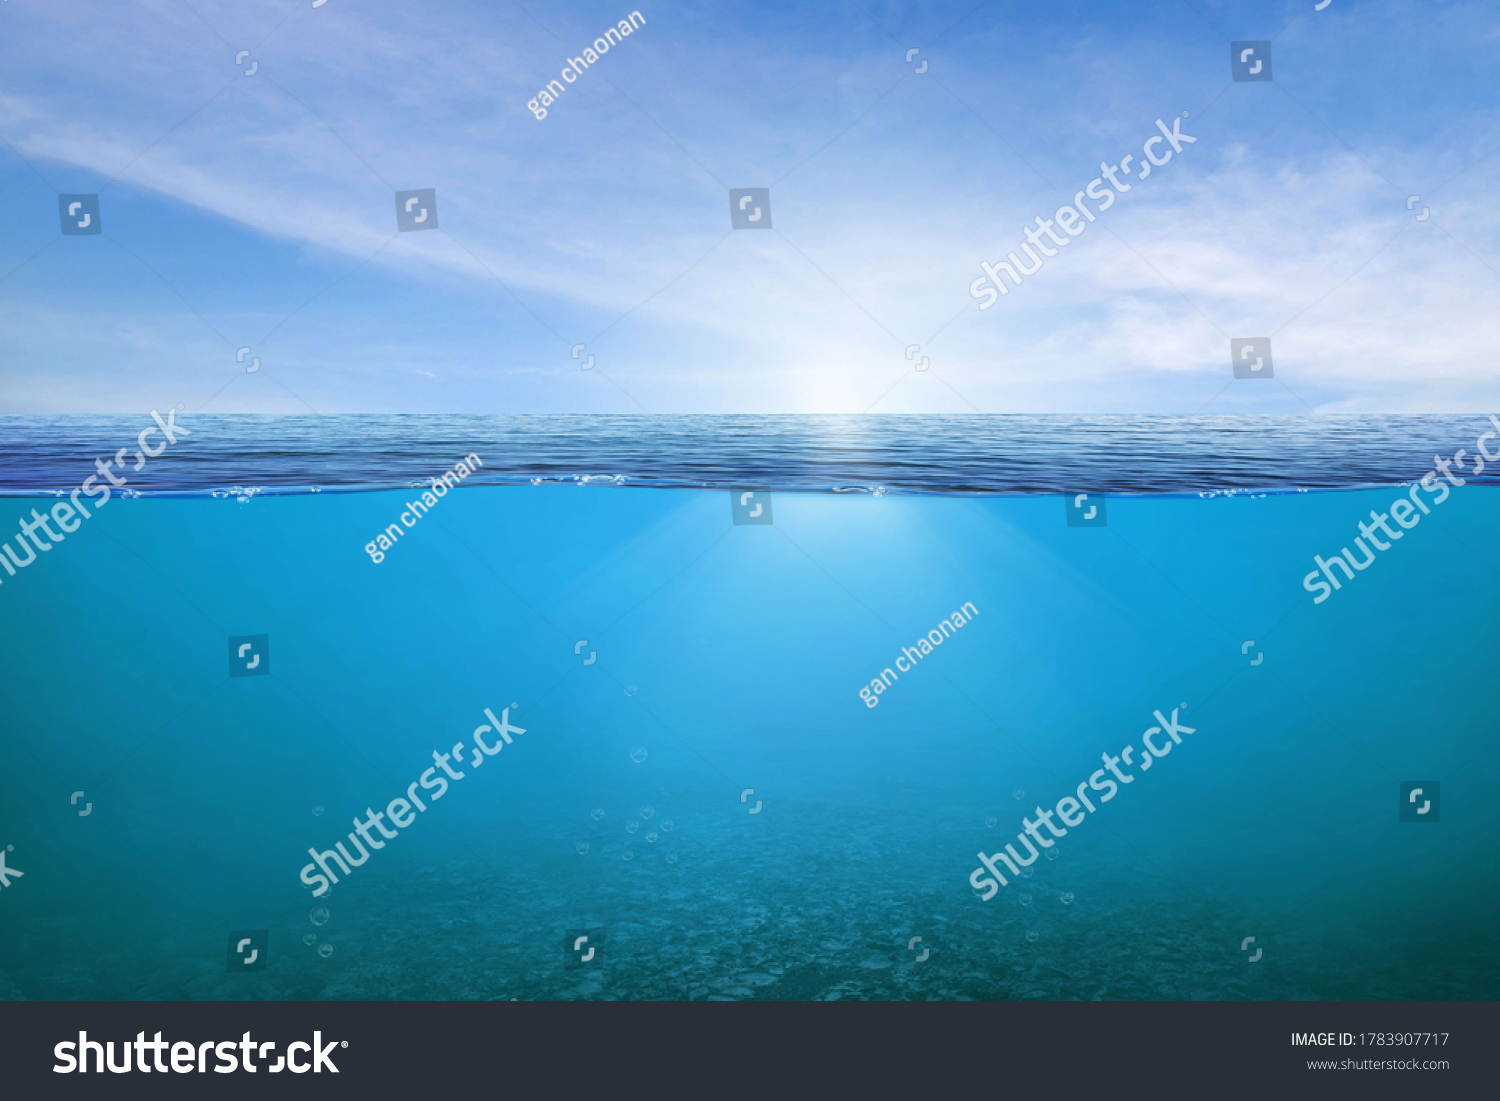 BLUE UNDER WATER waves and bubbles. Beautiful white clouds on blue sky over calm sea with sunlight reflection, Tranquil sea harmony of calm water surface. Sunny sky and calm blue ocean.  #1783907717